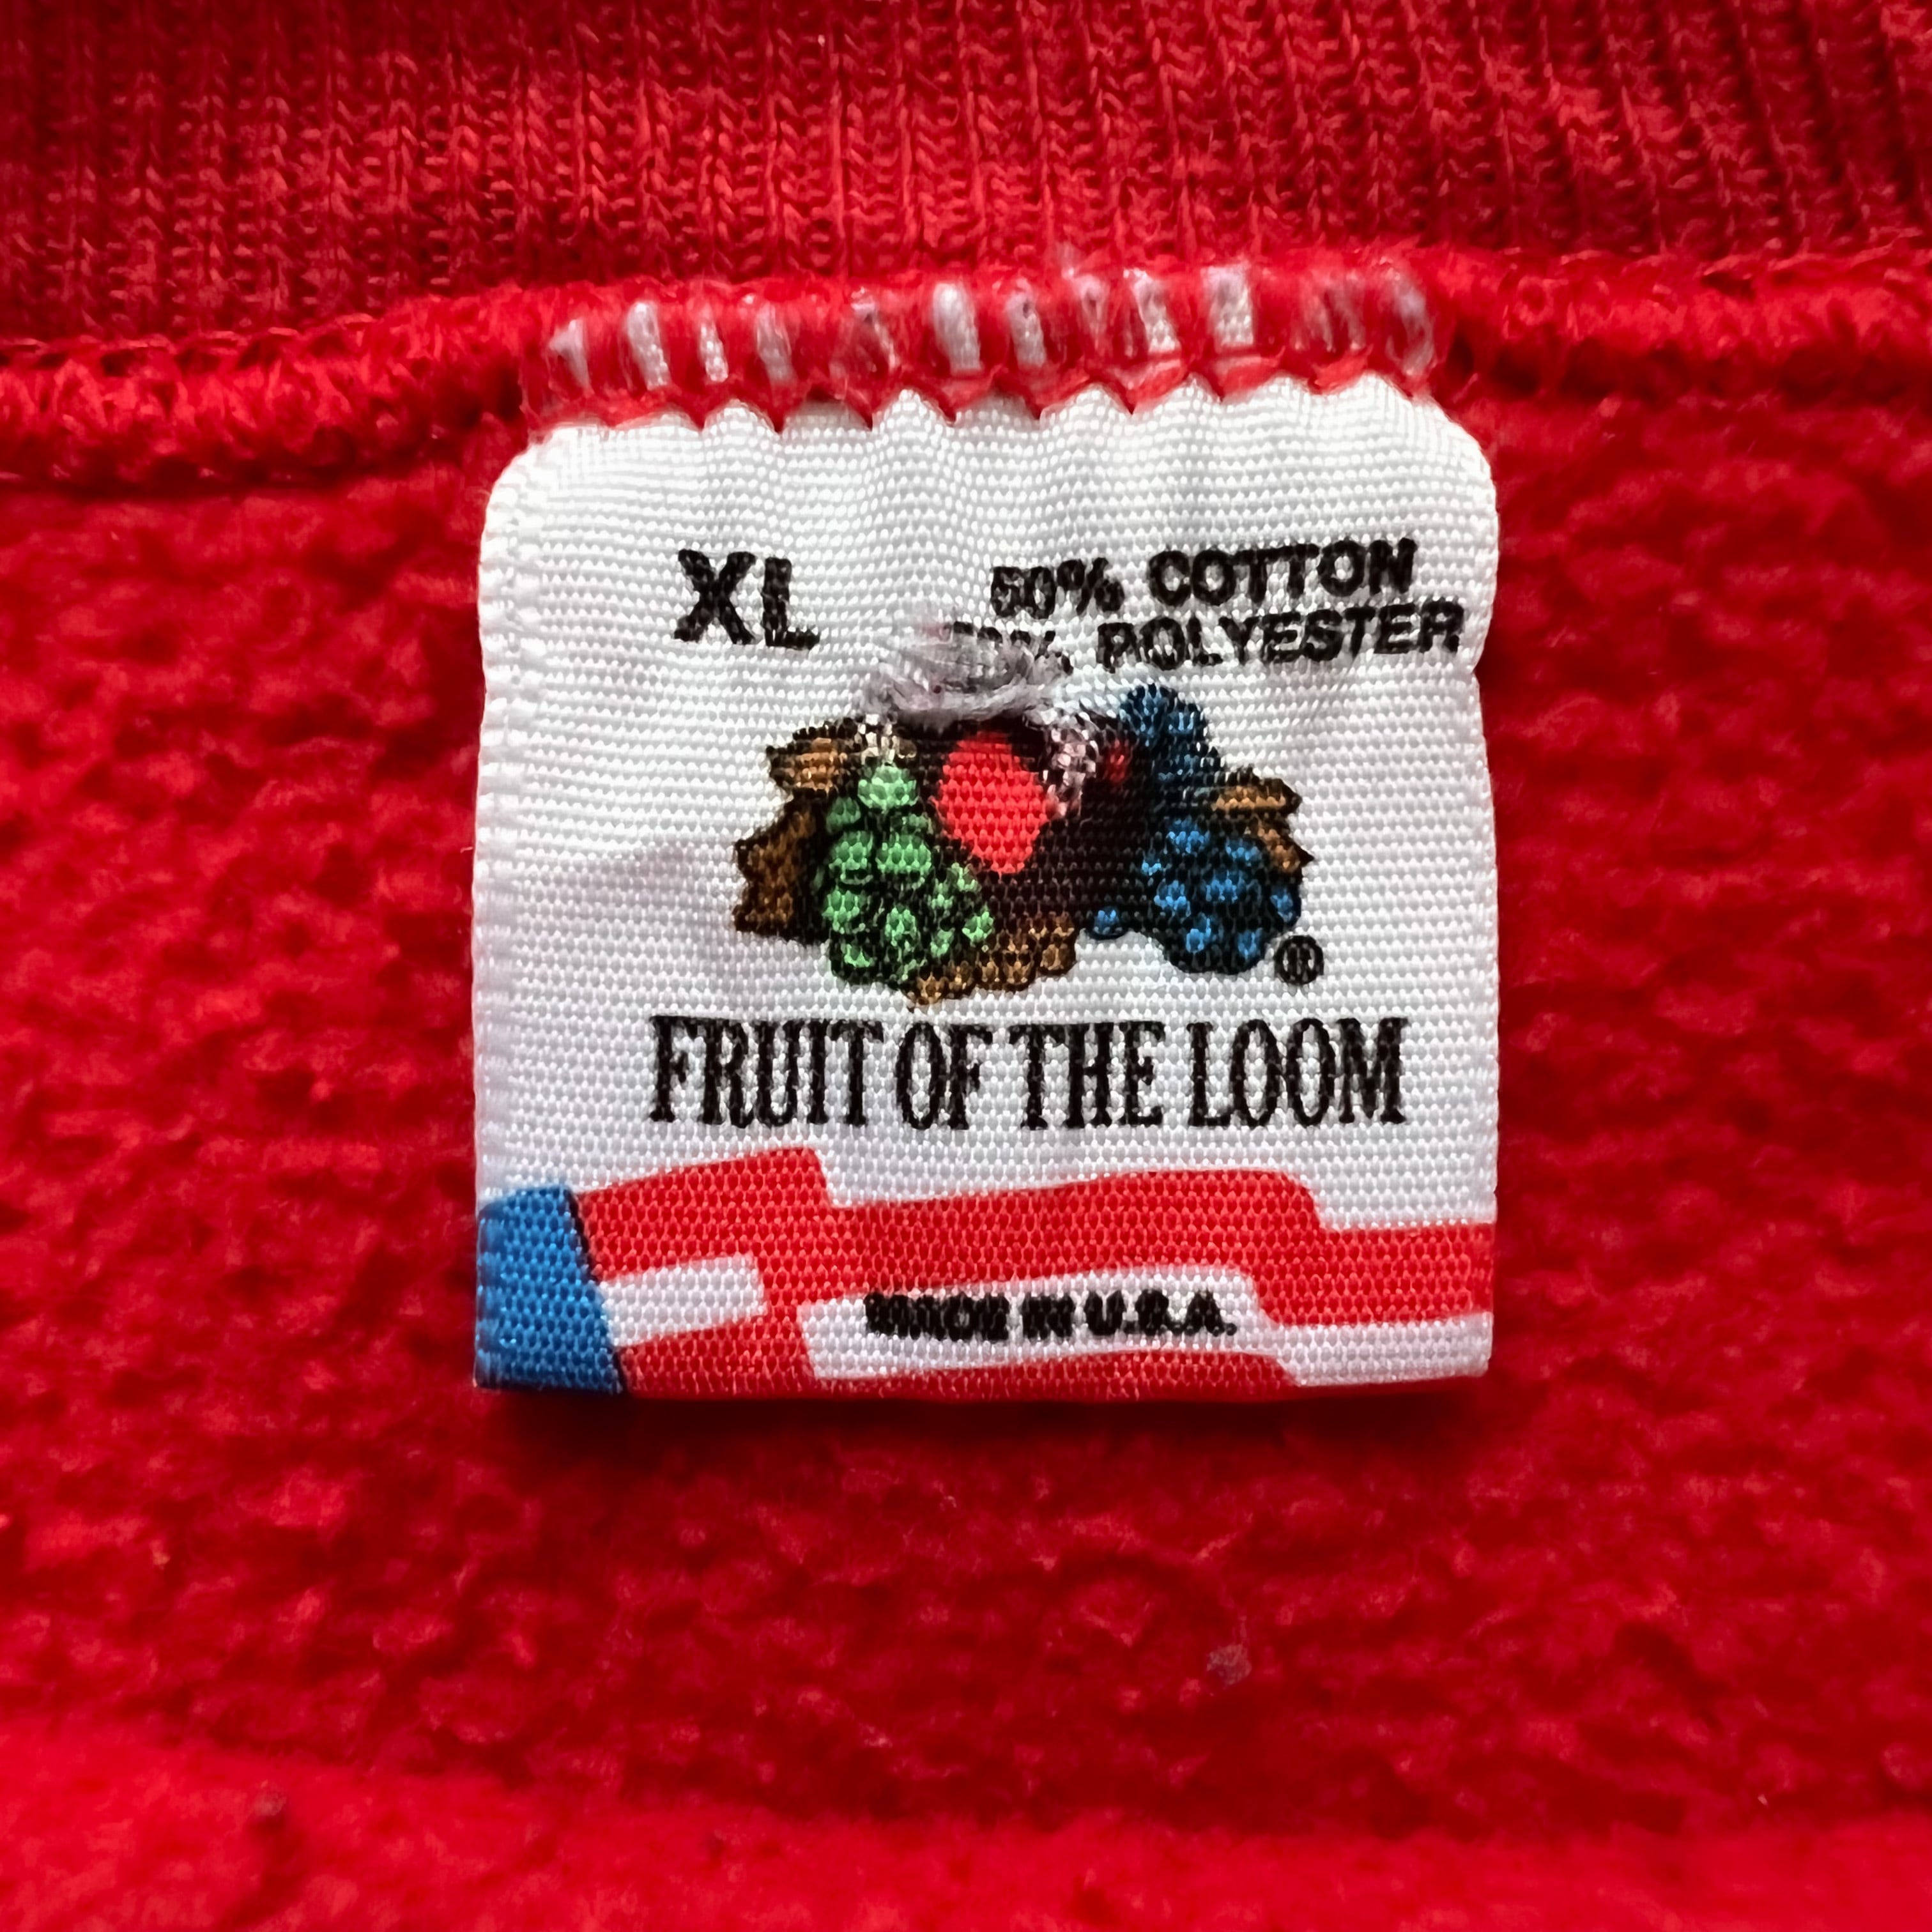 80s made in usa fruit of the room body XL “Coca - Cola” sweat